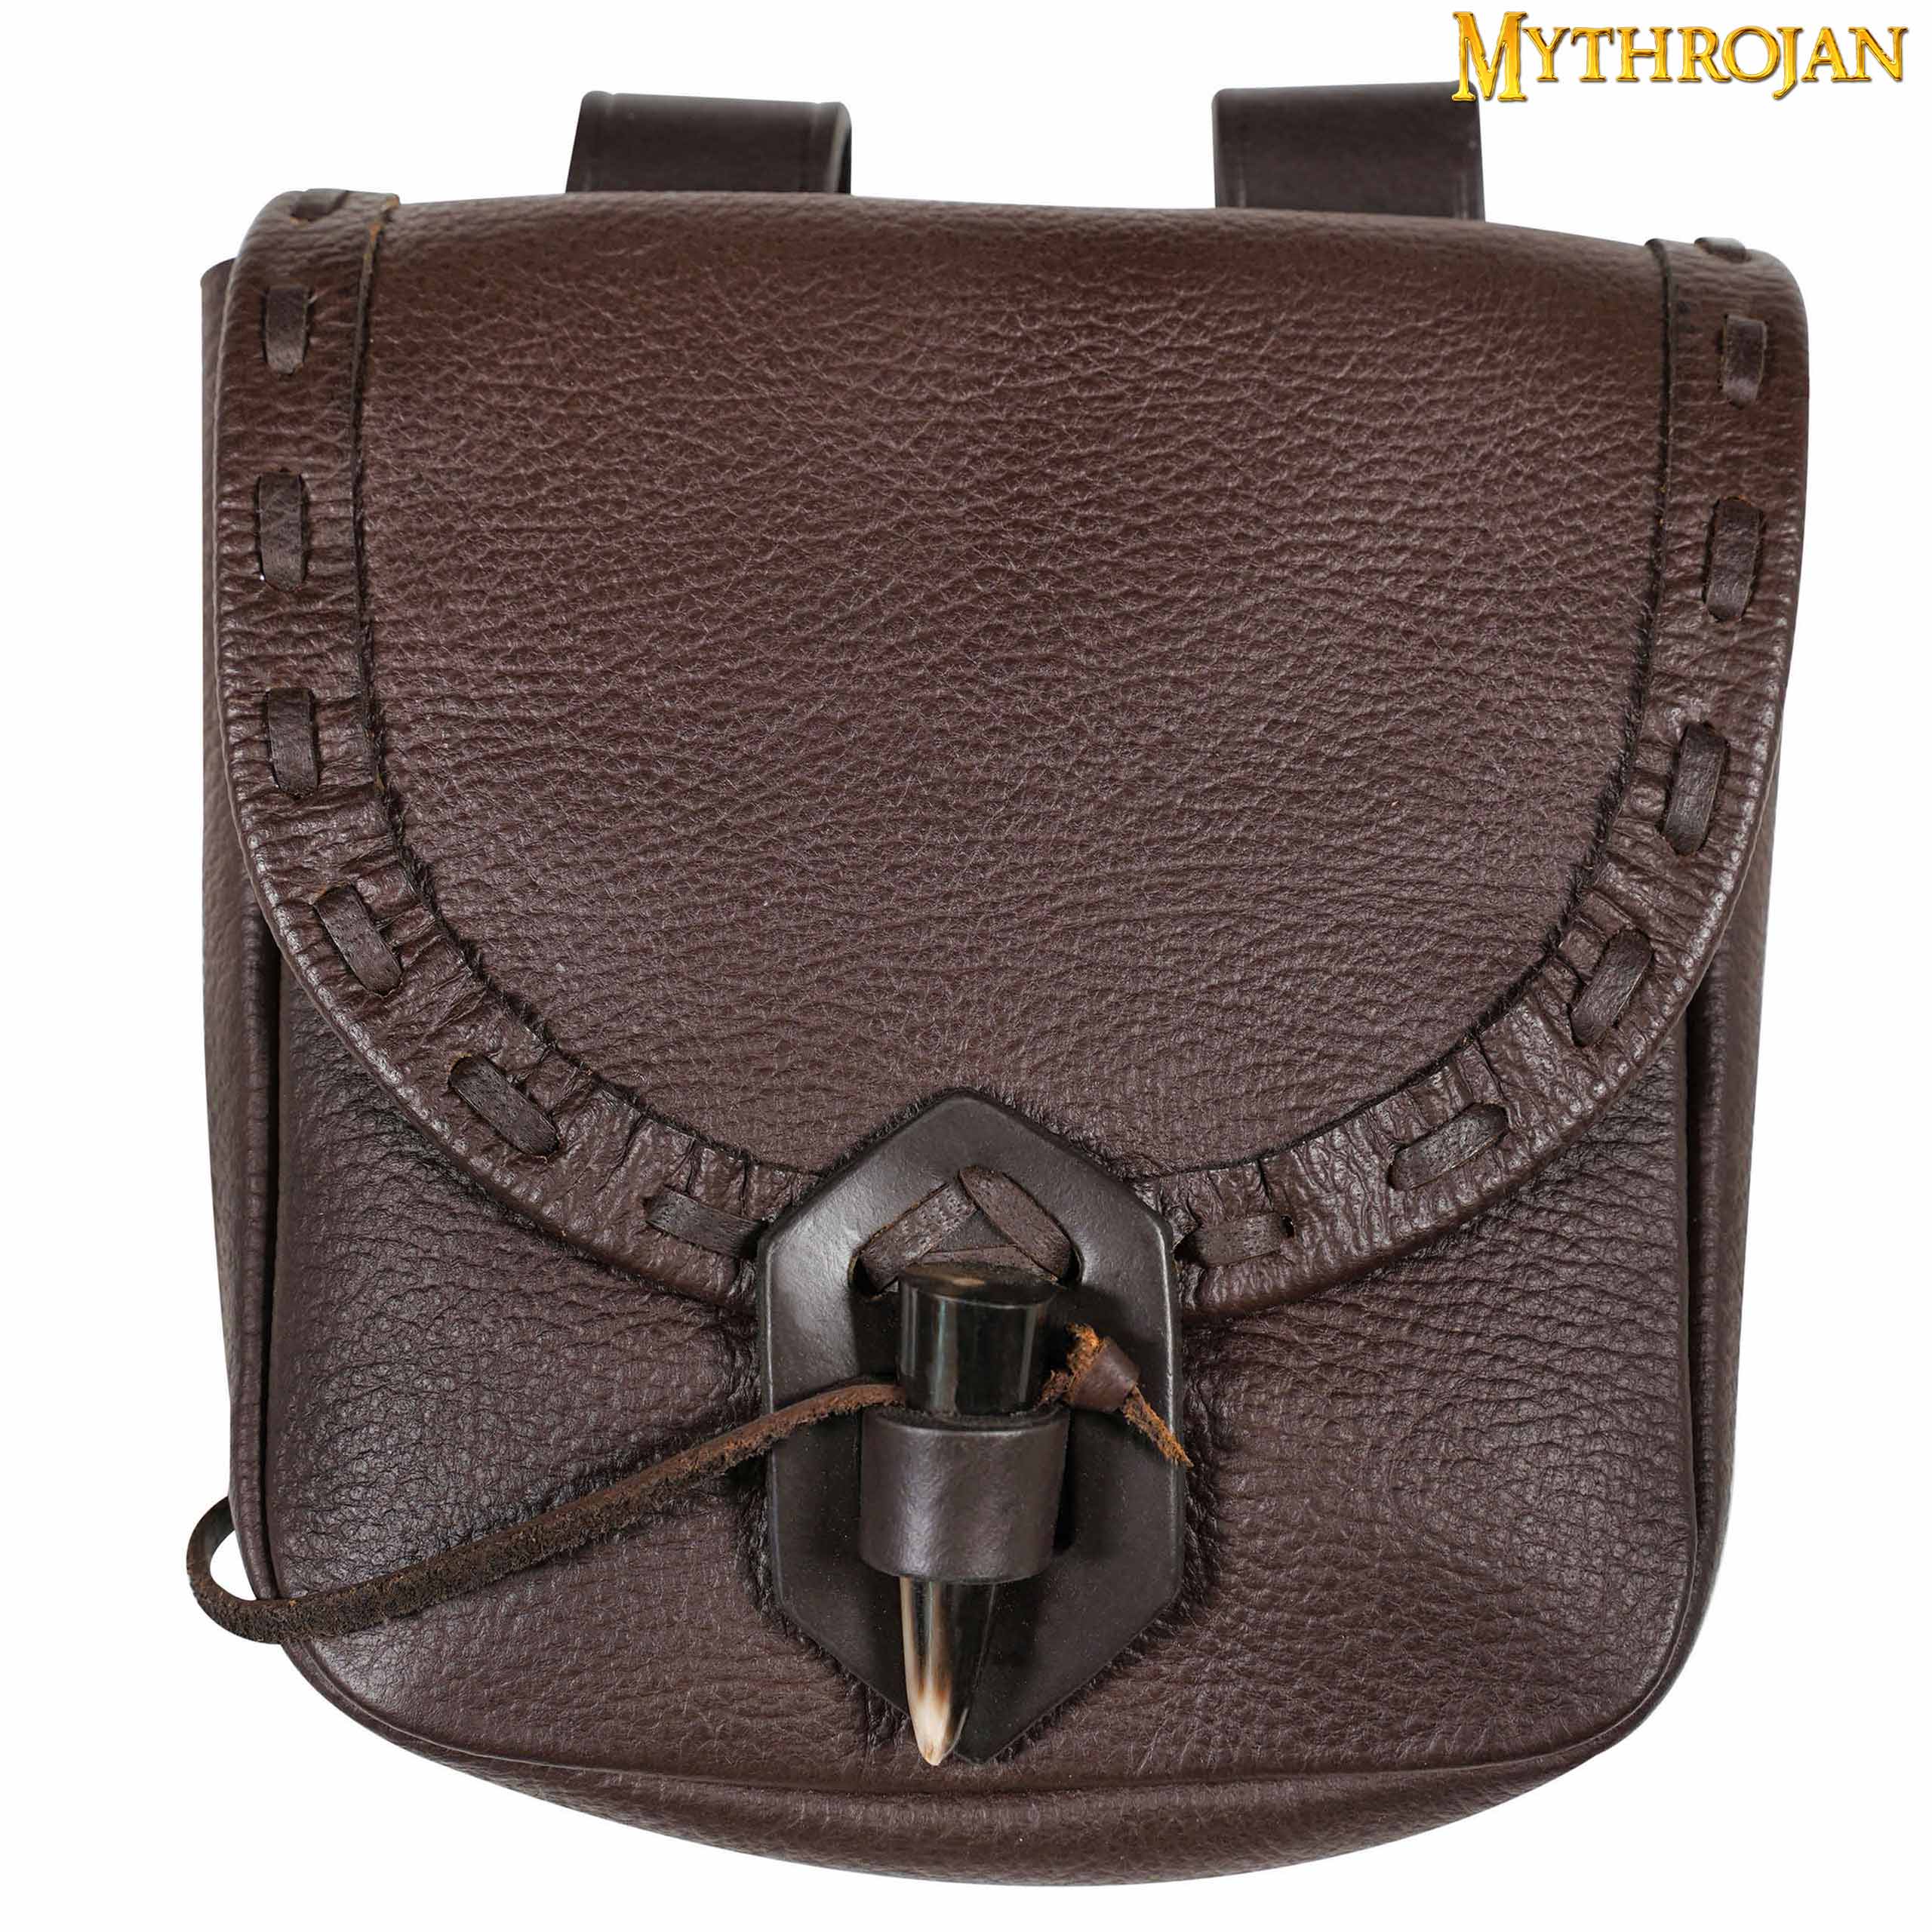 Viking Bag with Horn Toggle - Brown